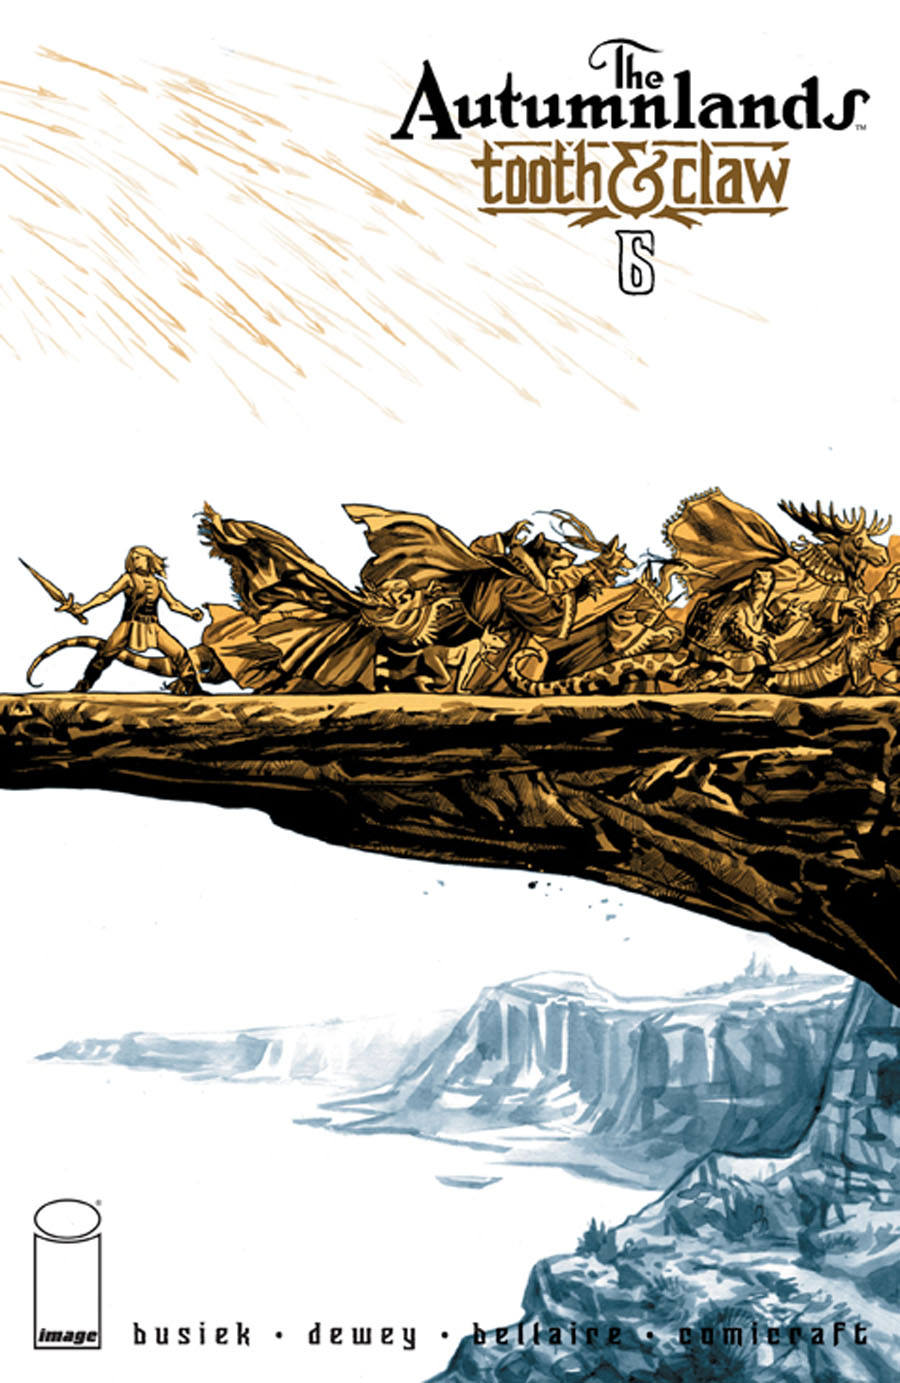 Autumnlands Tooth & Claw #6 Cover A Ben Dewey